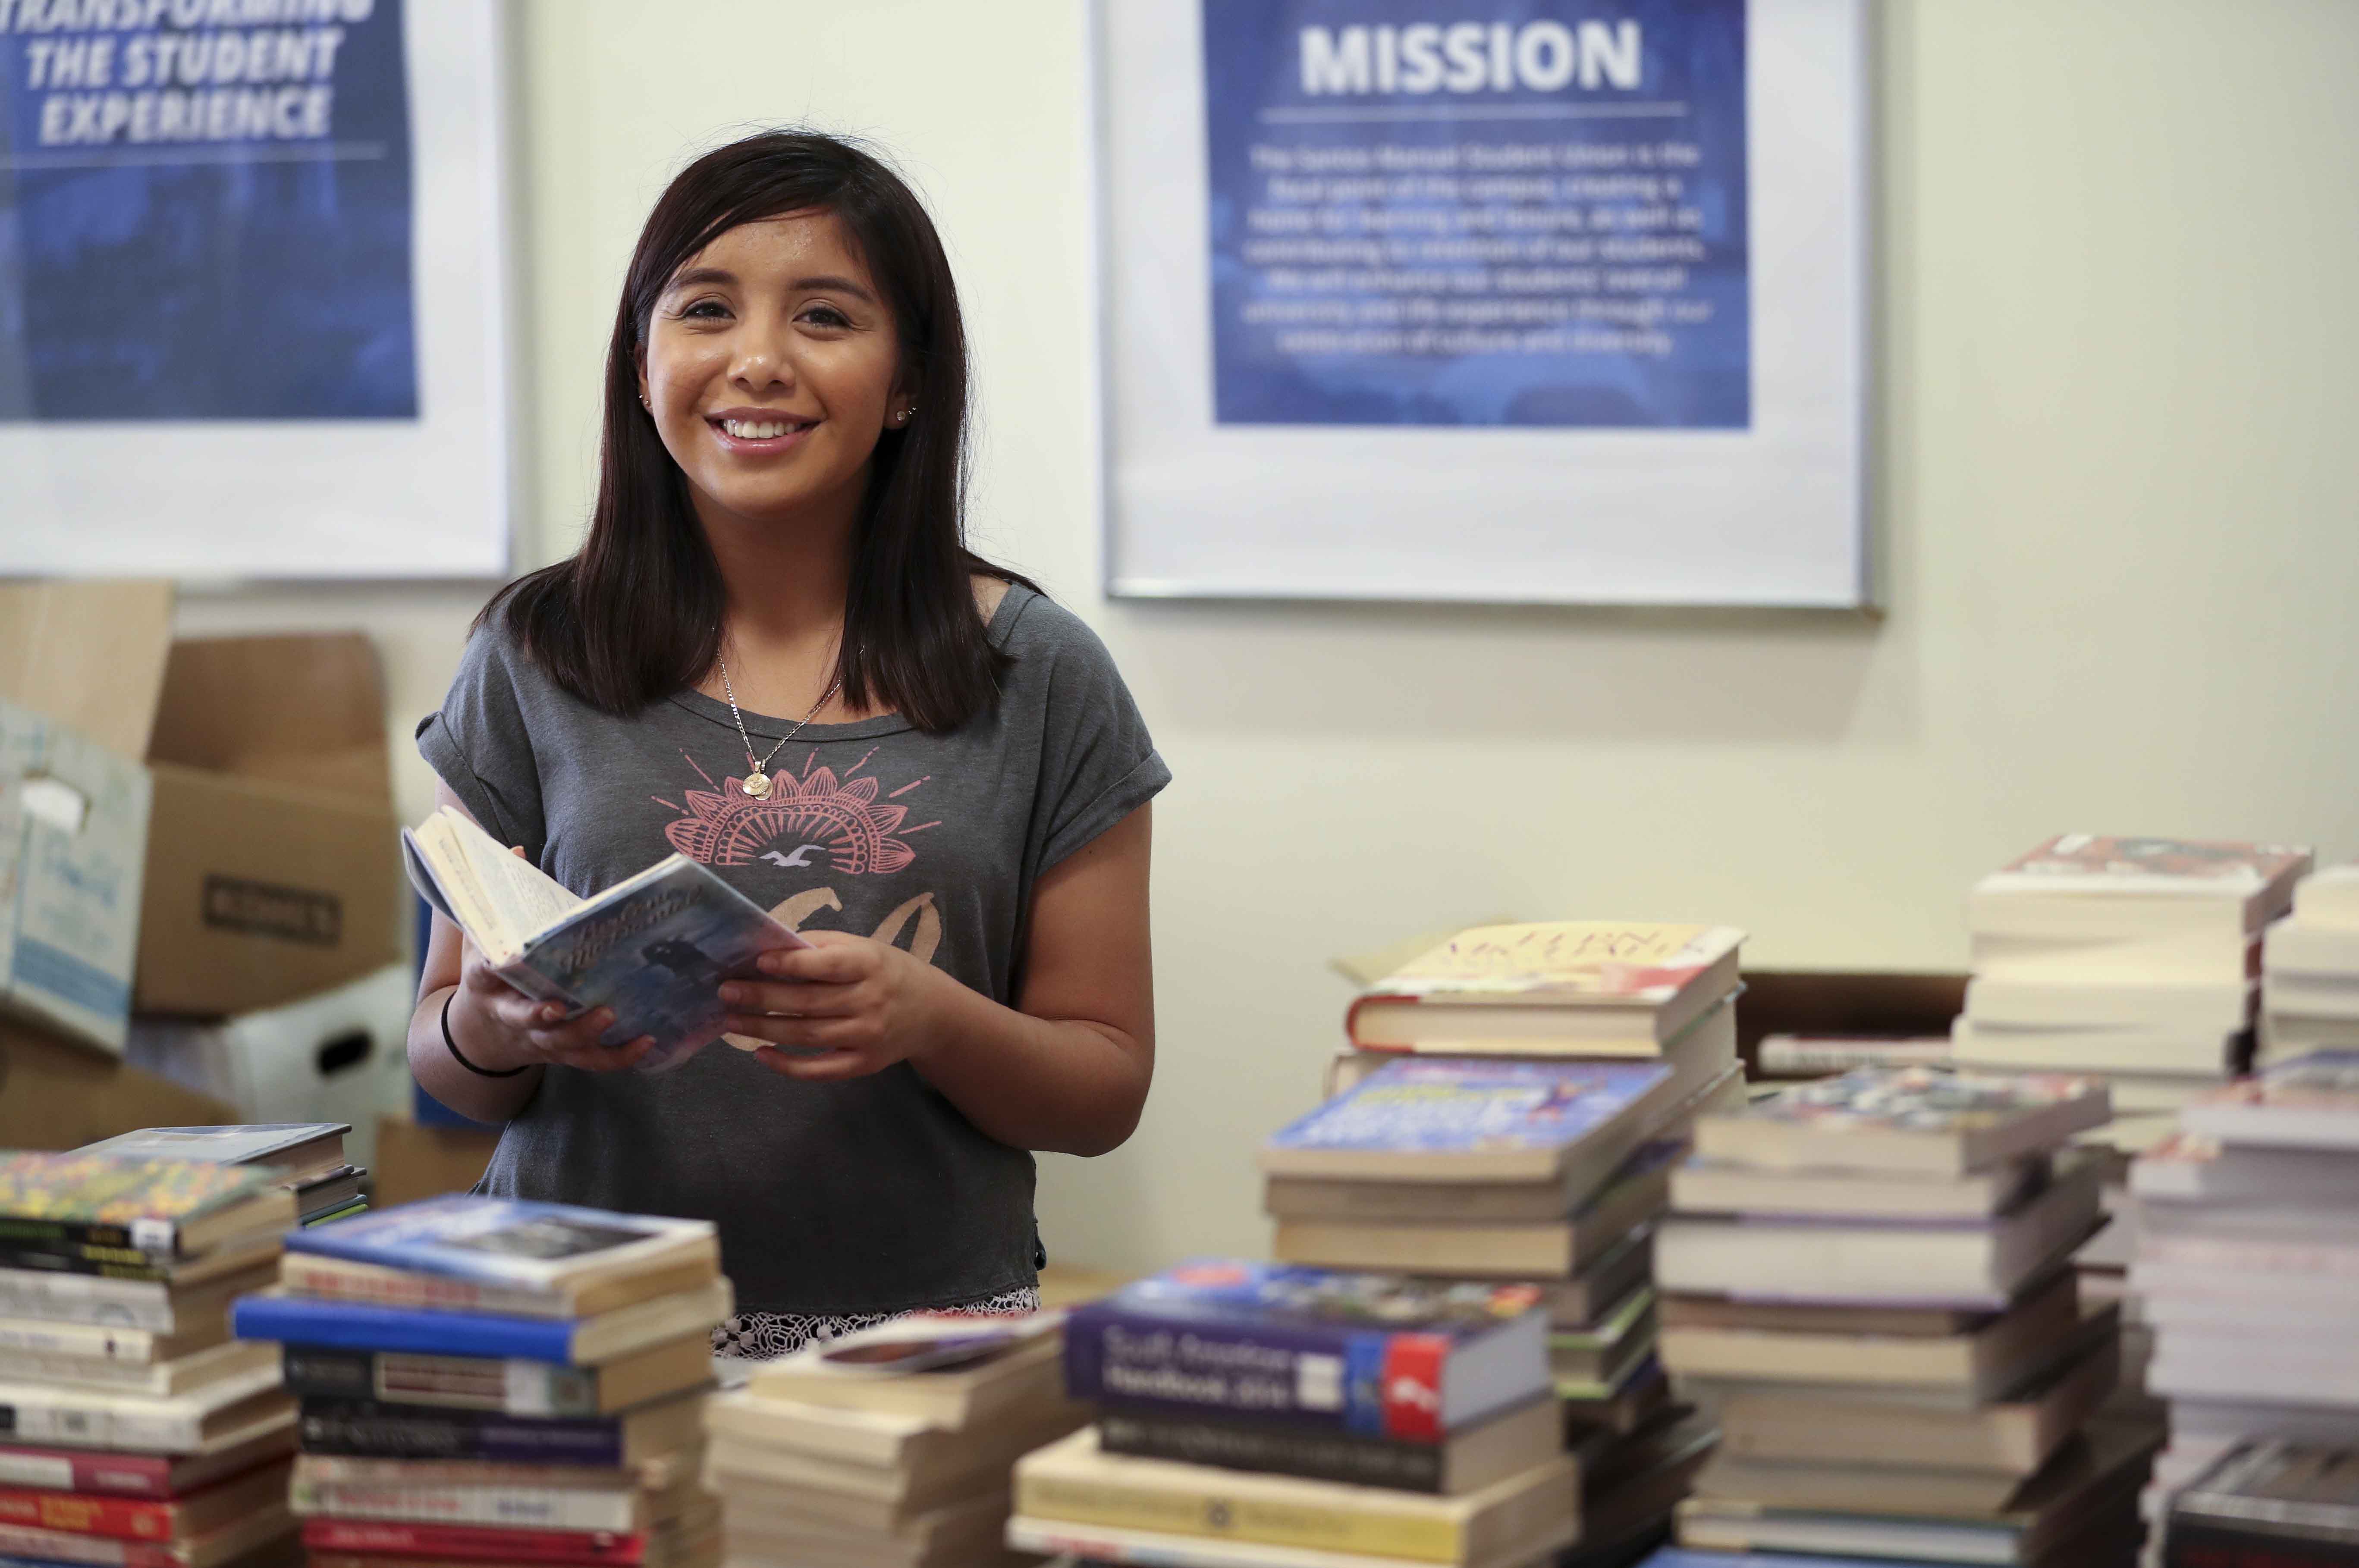 More than 5,000 books were given away to children and young adults.